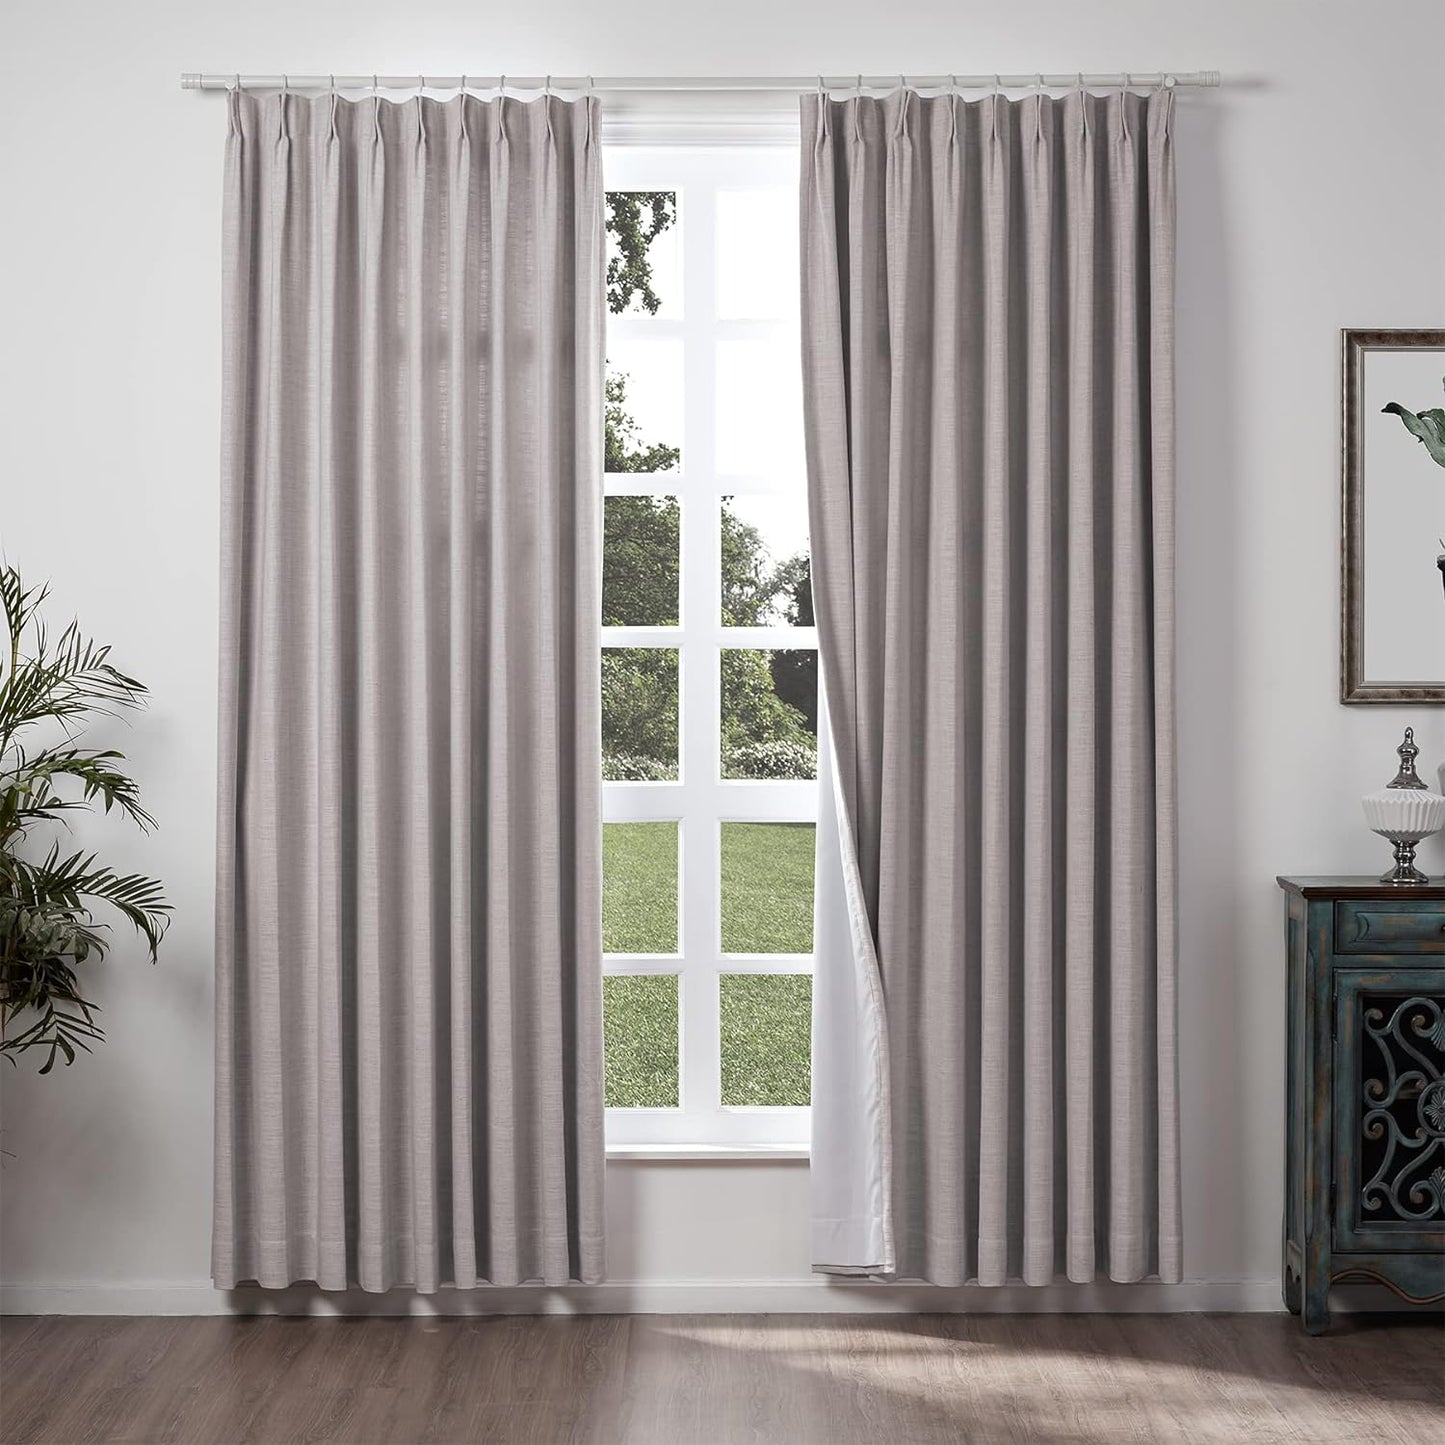 Chadmade 50" W X 63" L Polyester Linen Drape with Blackout Lining Pinch Pleat Curtain for Sliding Door Patio Door Living Room Bedroom, (1 Panel) Sand Beige Tallis Collection  ChadMade Parchment (20) 100Wx102L 